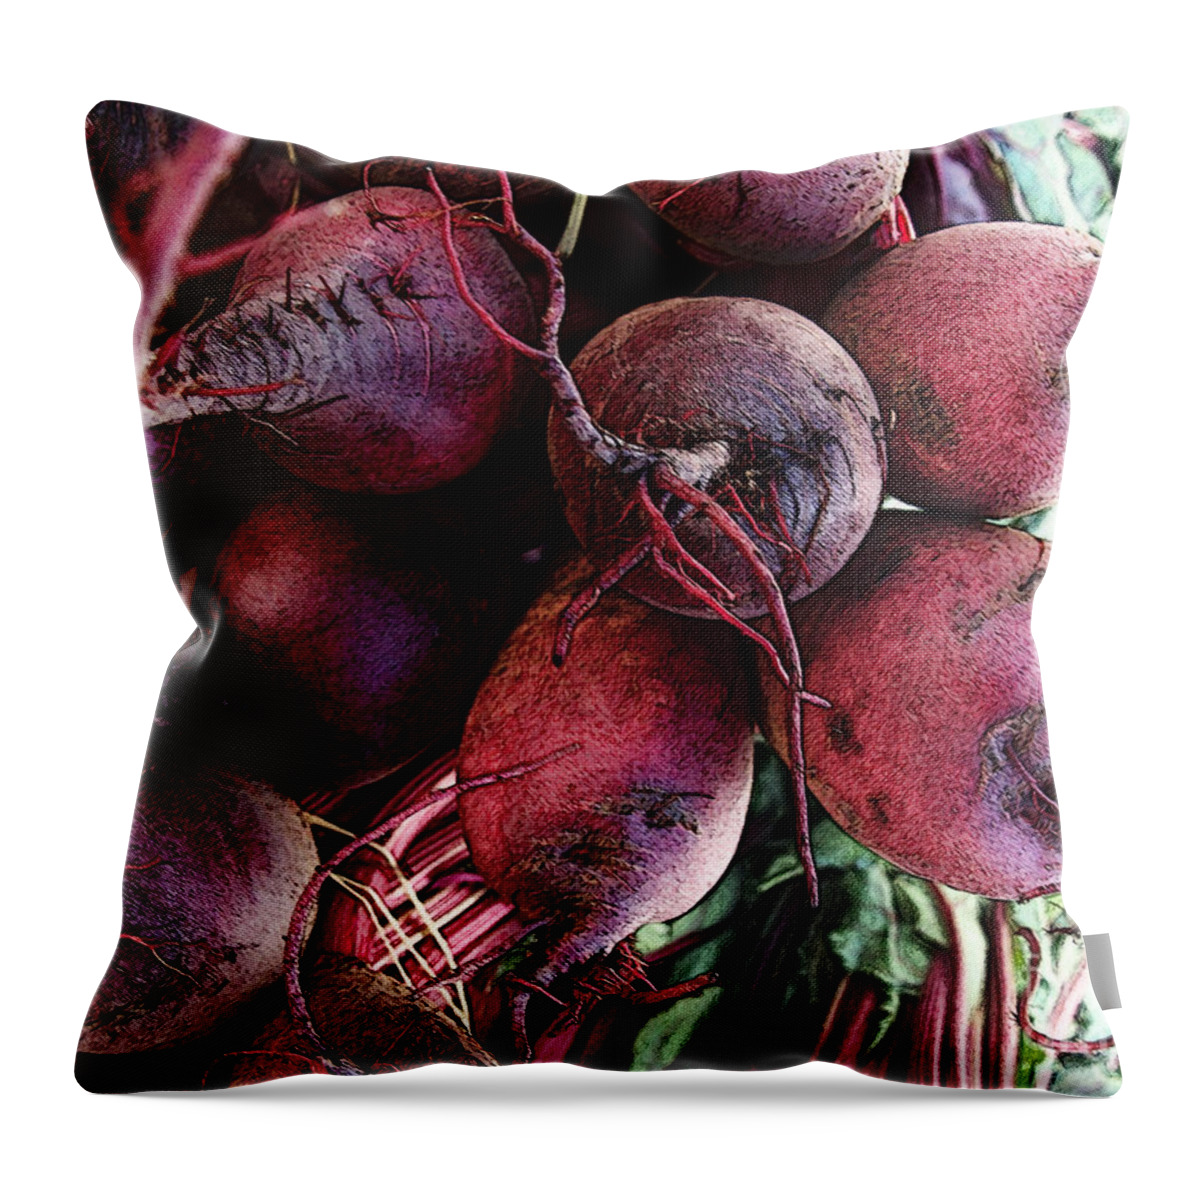 Beets Throw Pillow featuring the digital art Beets by David Blank